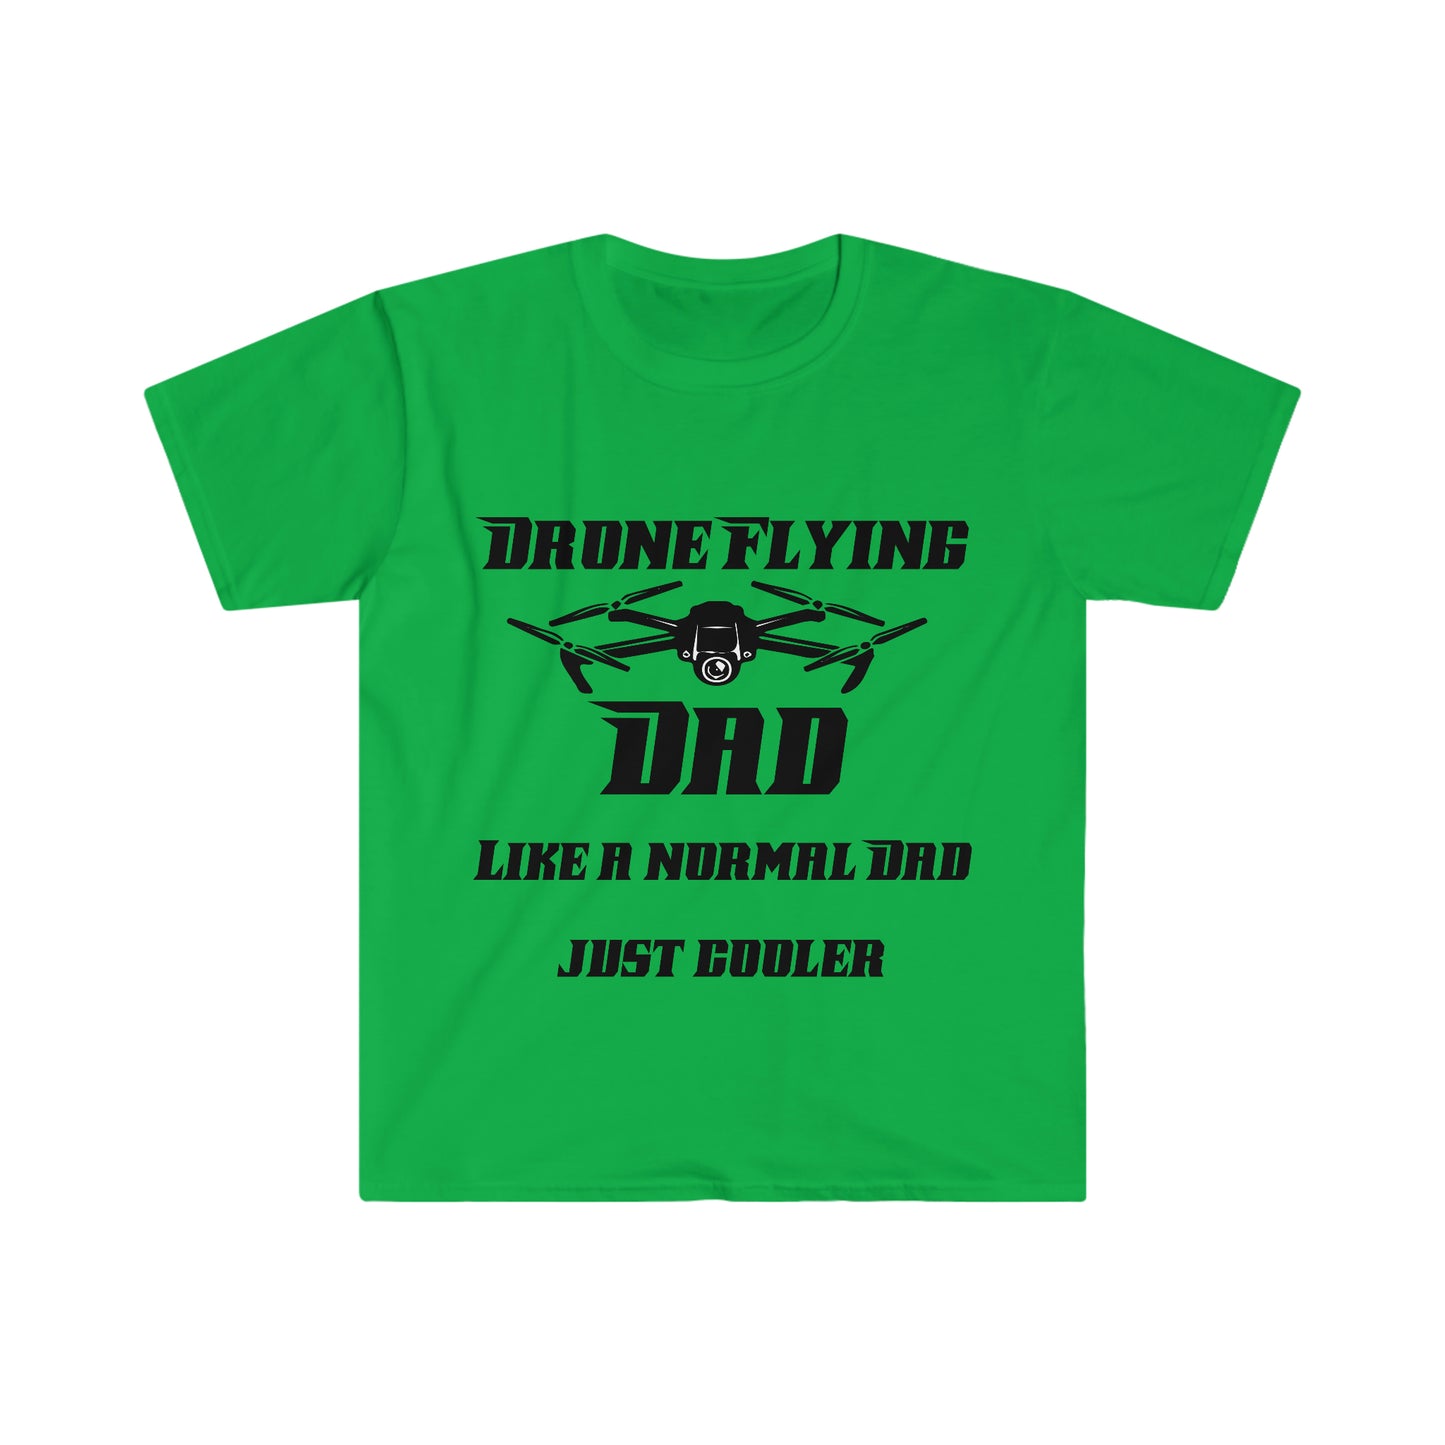 Drone Flying Dad like a normal Dad just cooler Unisex Softstyle T-Shirt